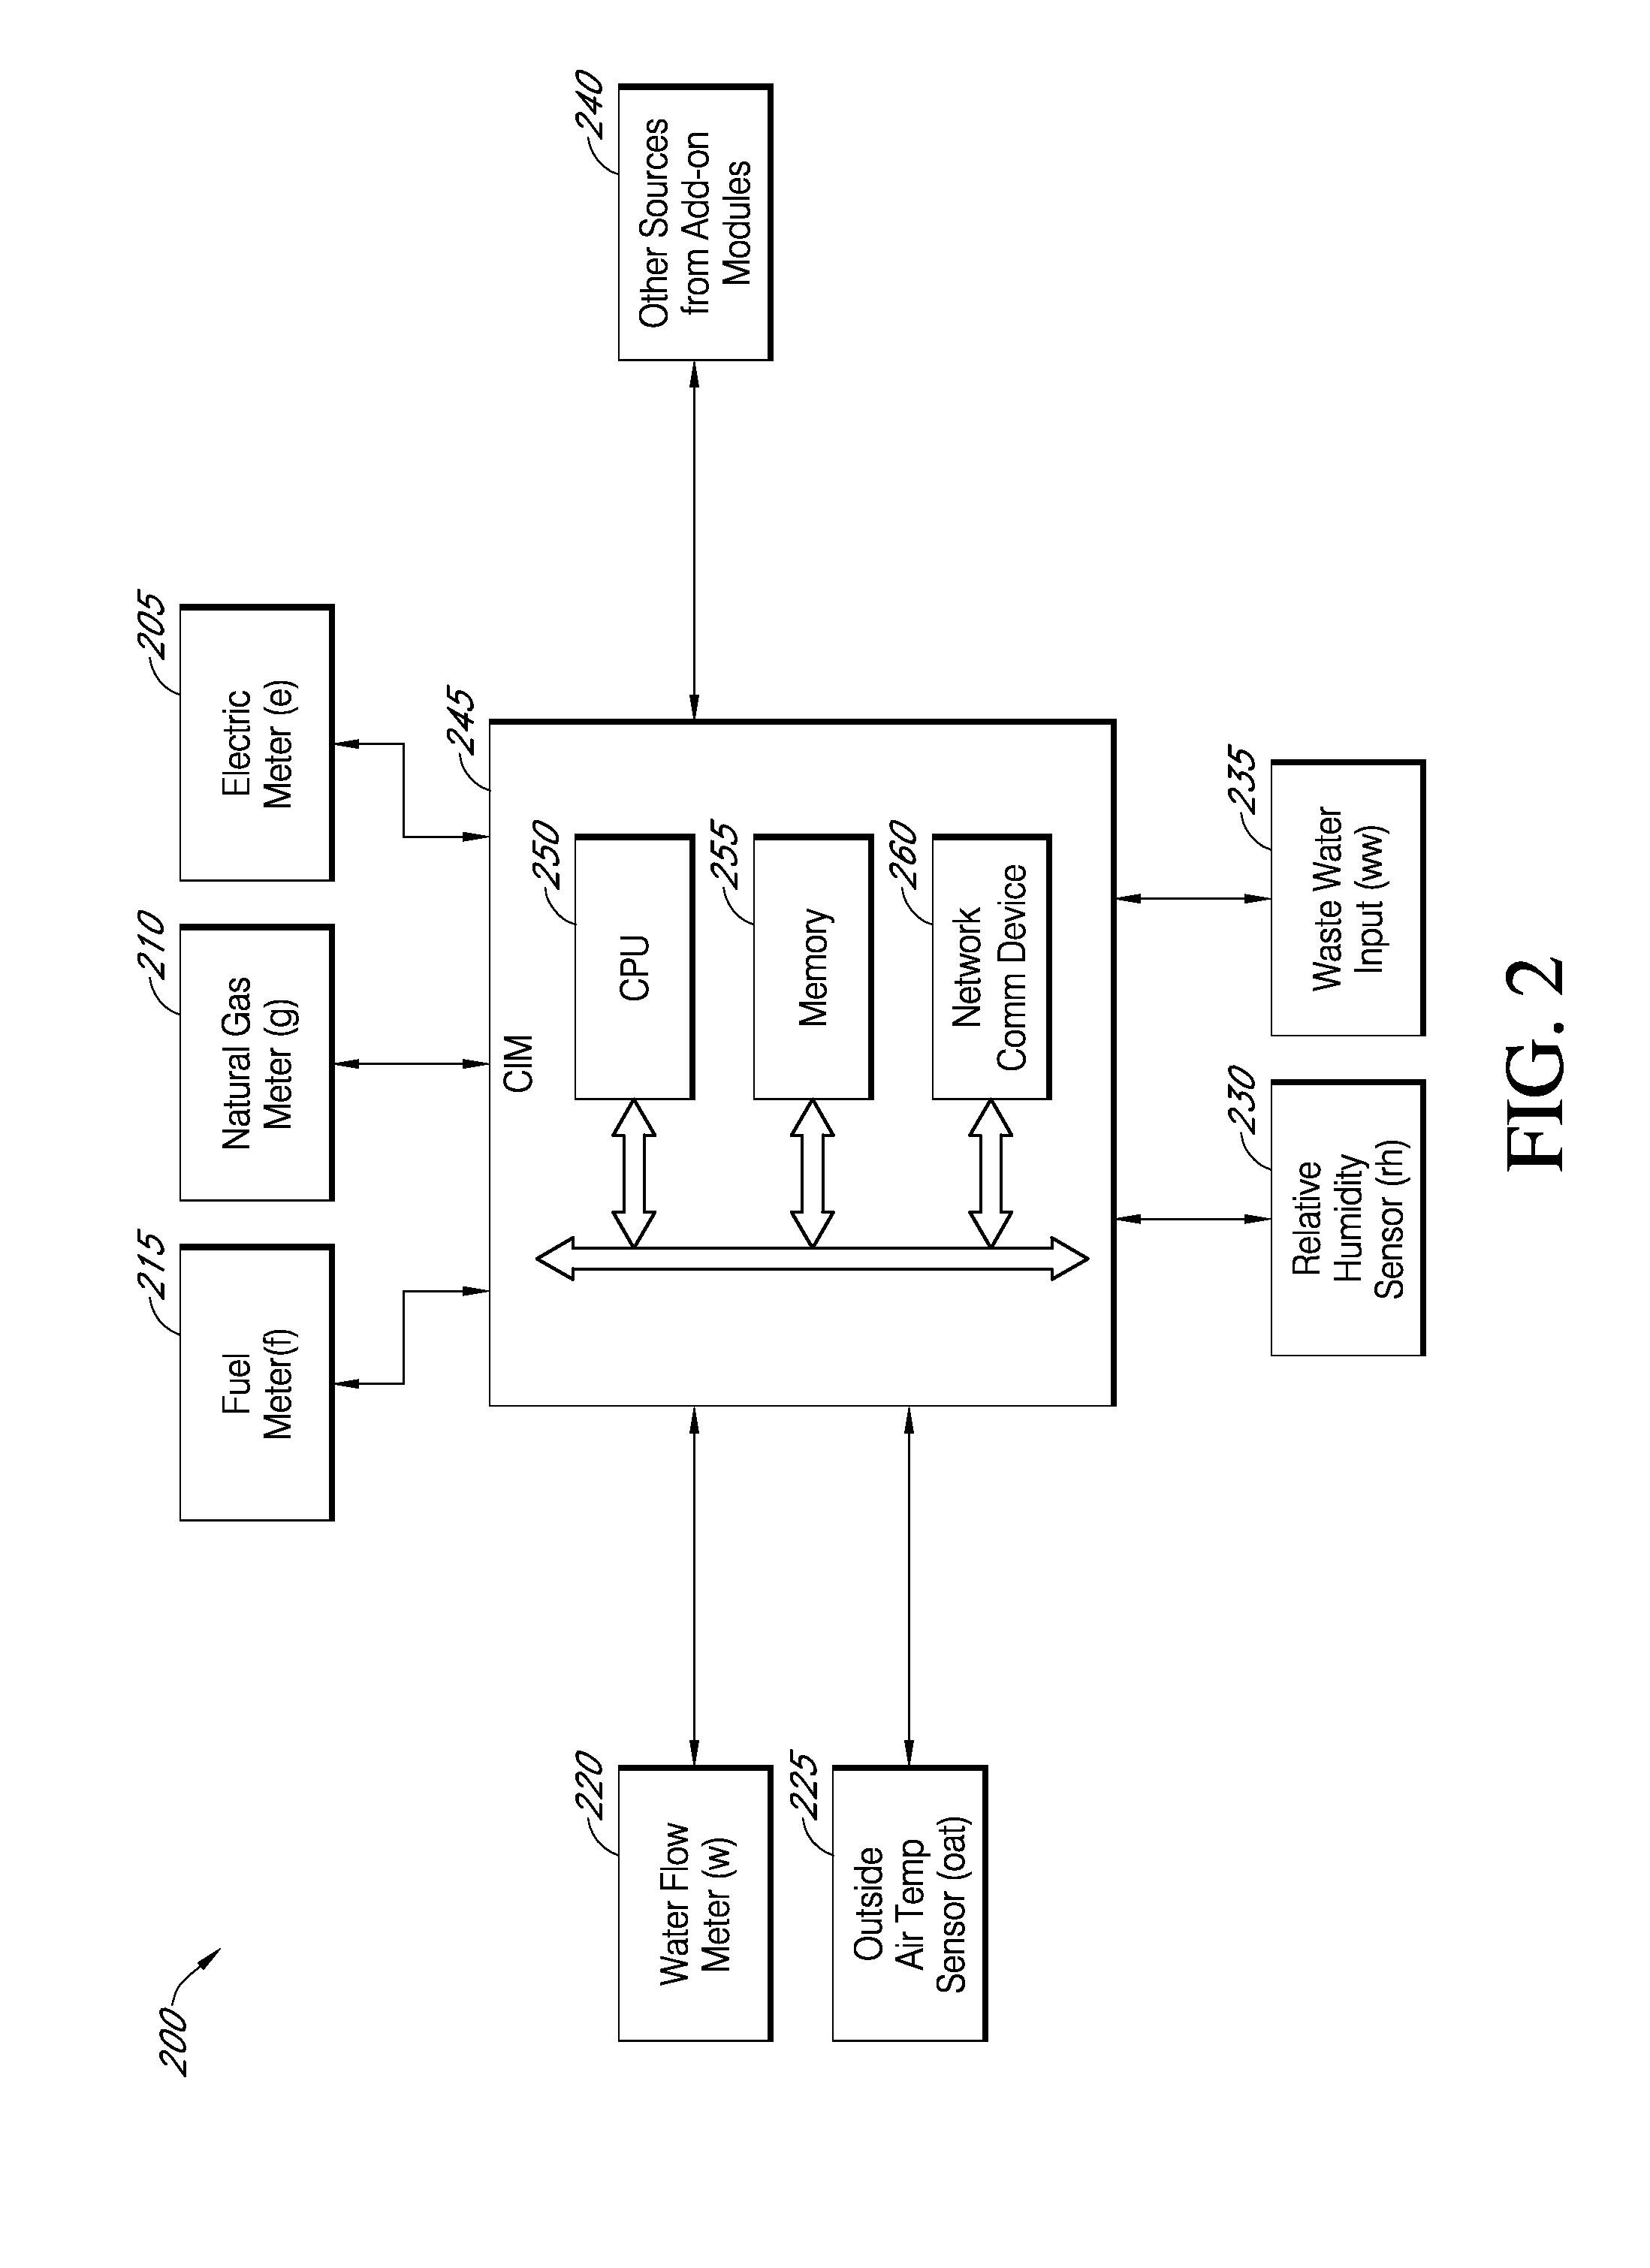 Systems and methods for assessing and optimizing energy use and environmental impact